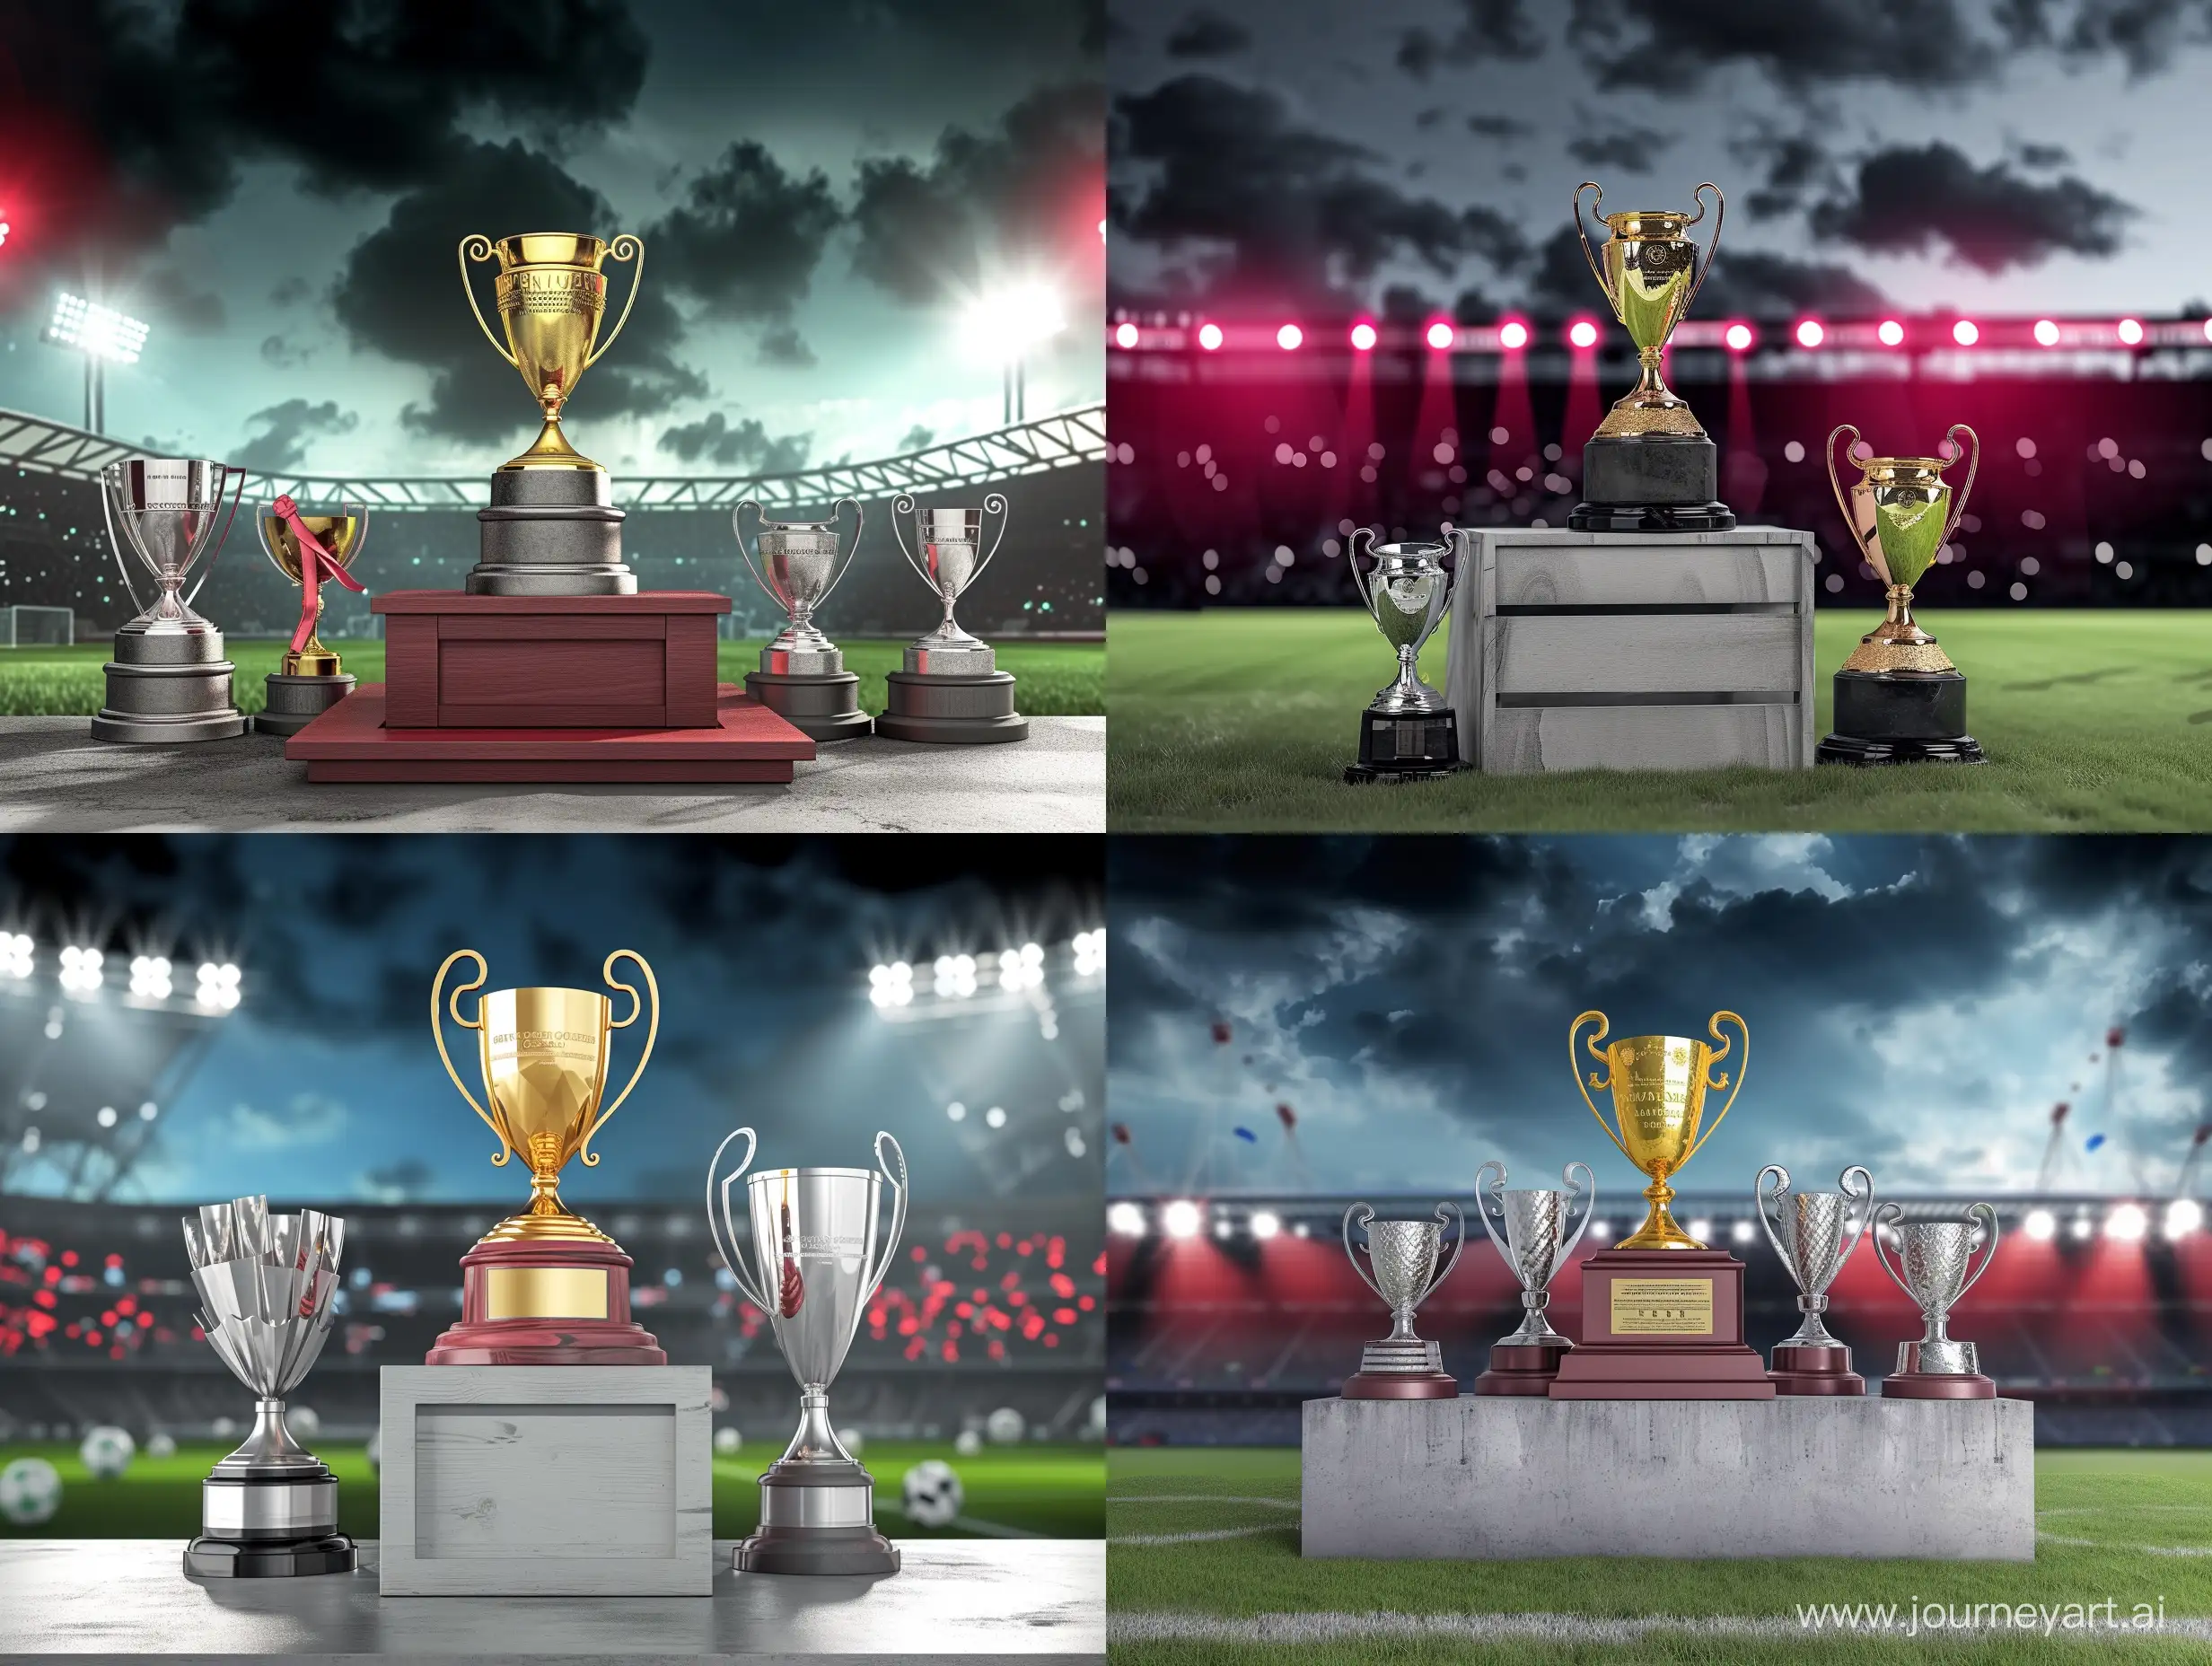 Dramatic-Night-Lights-Illuminate-Soccer-Stadium-Podium-with-Gold-and-Silver-Trophies